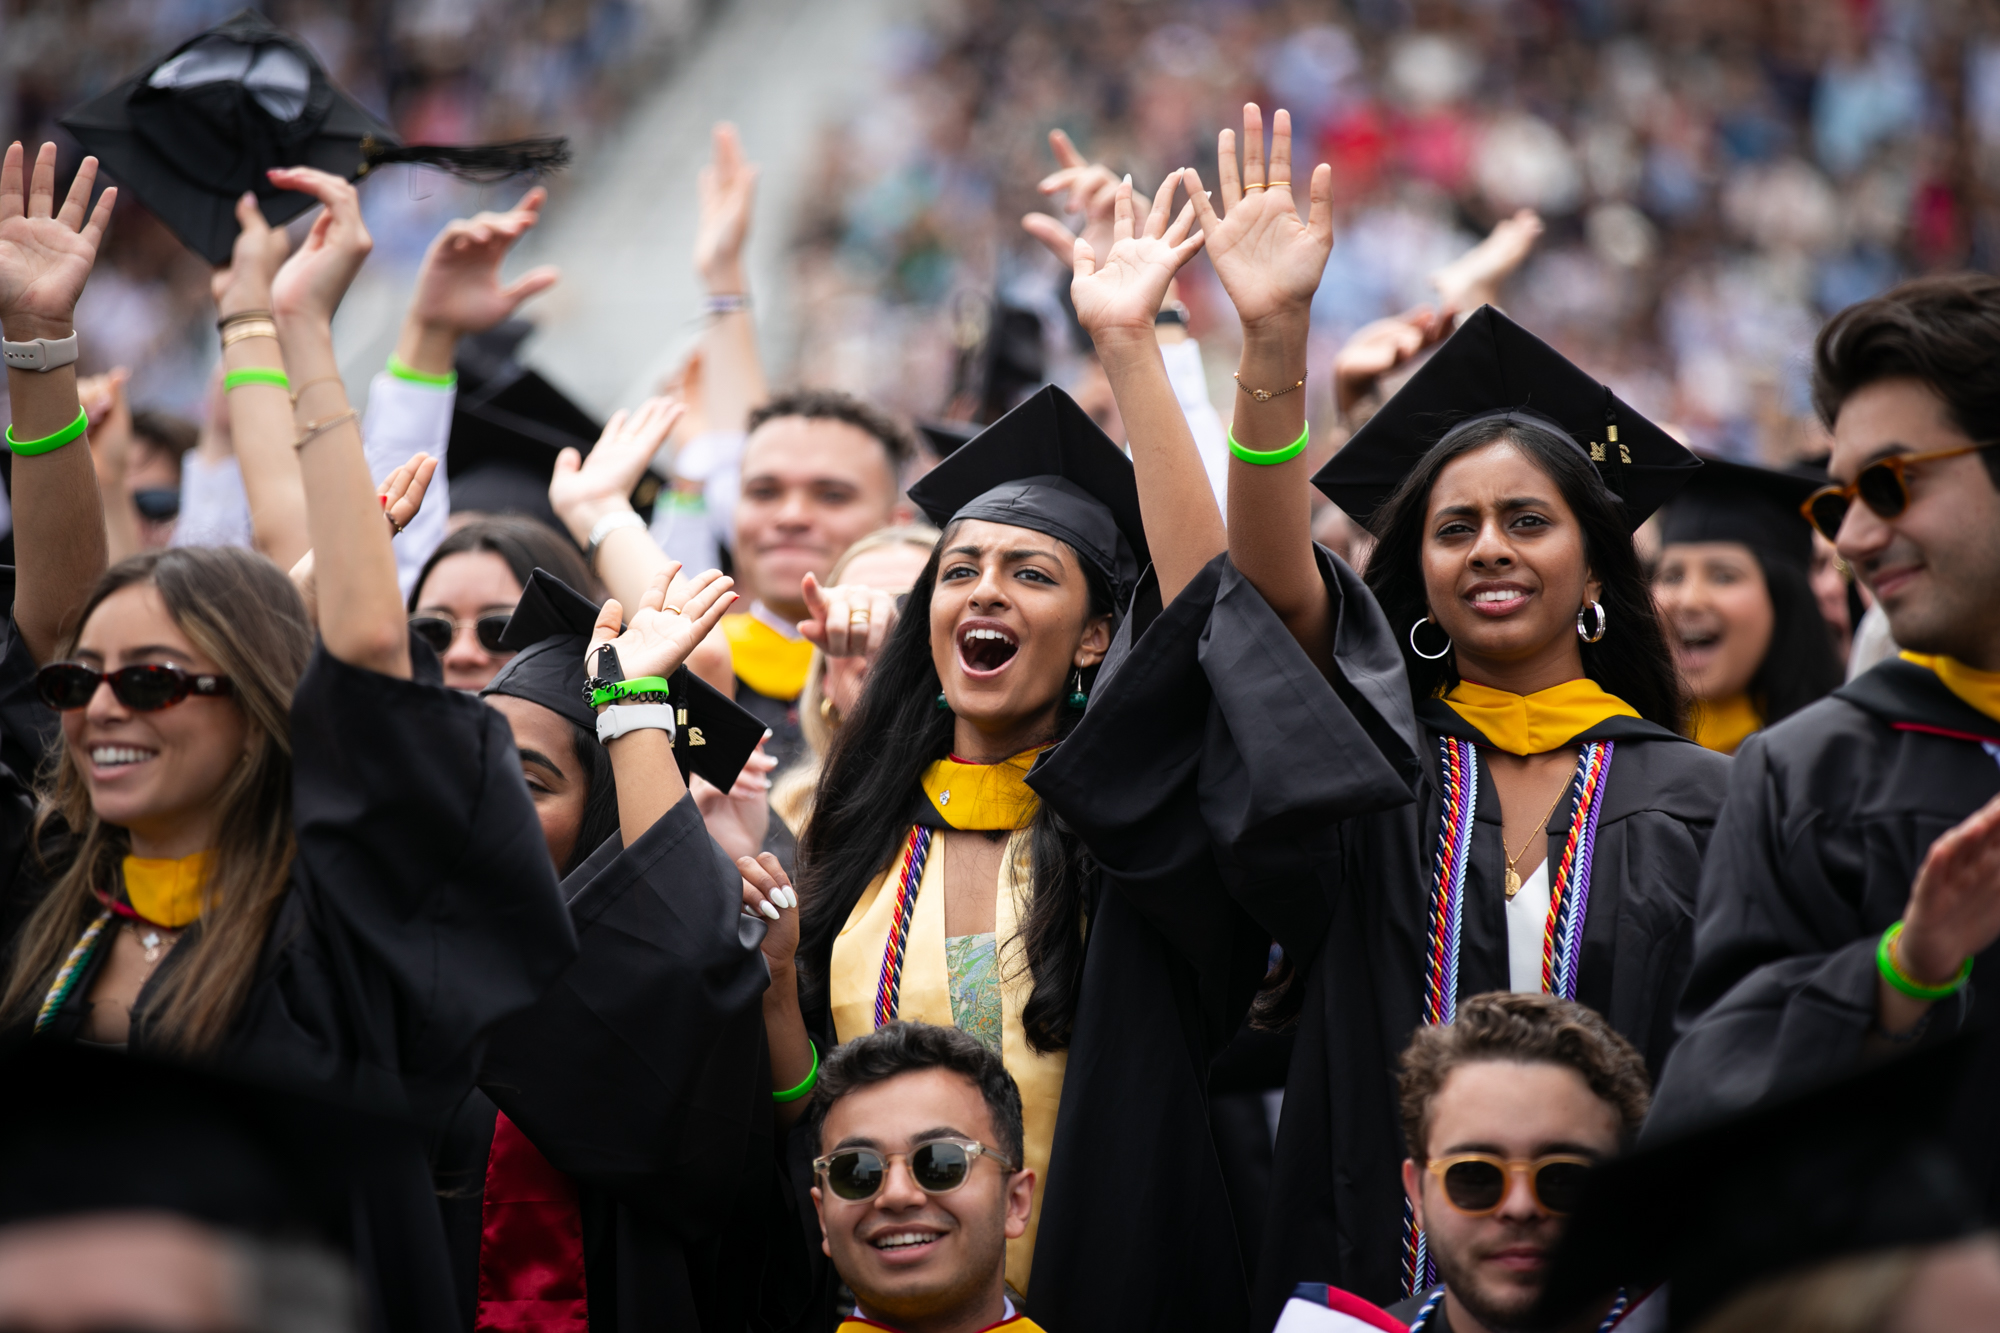 students cheer with arms raised during commencement